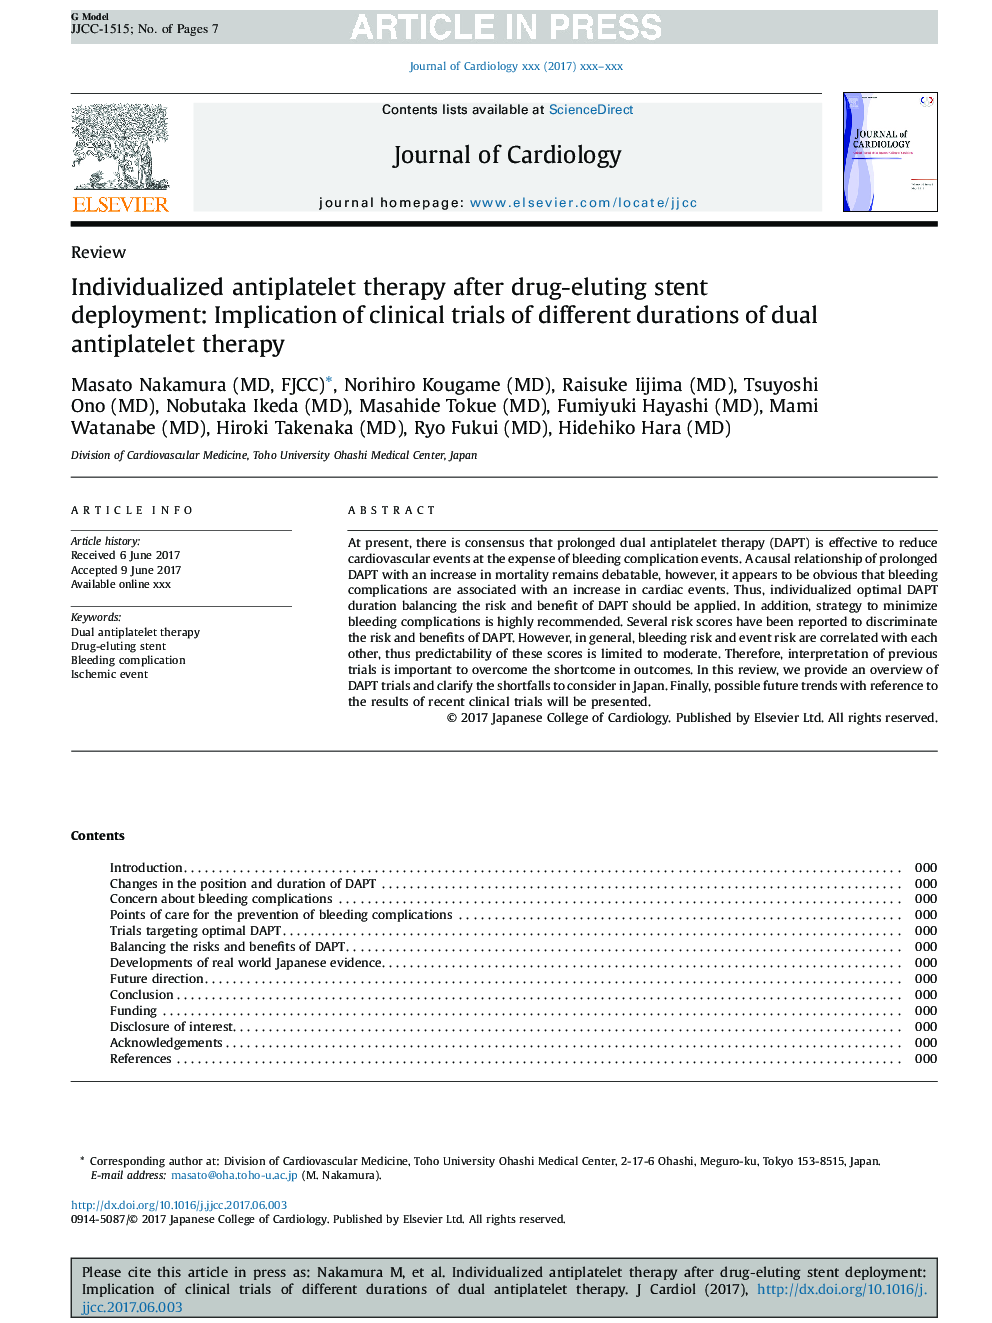 Individualized antiplatelet therapy after drug-eluting stent deployment: Implication of clinical trials of different durations of dual antiplatelet therapy